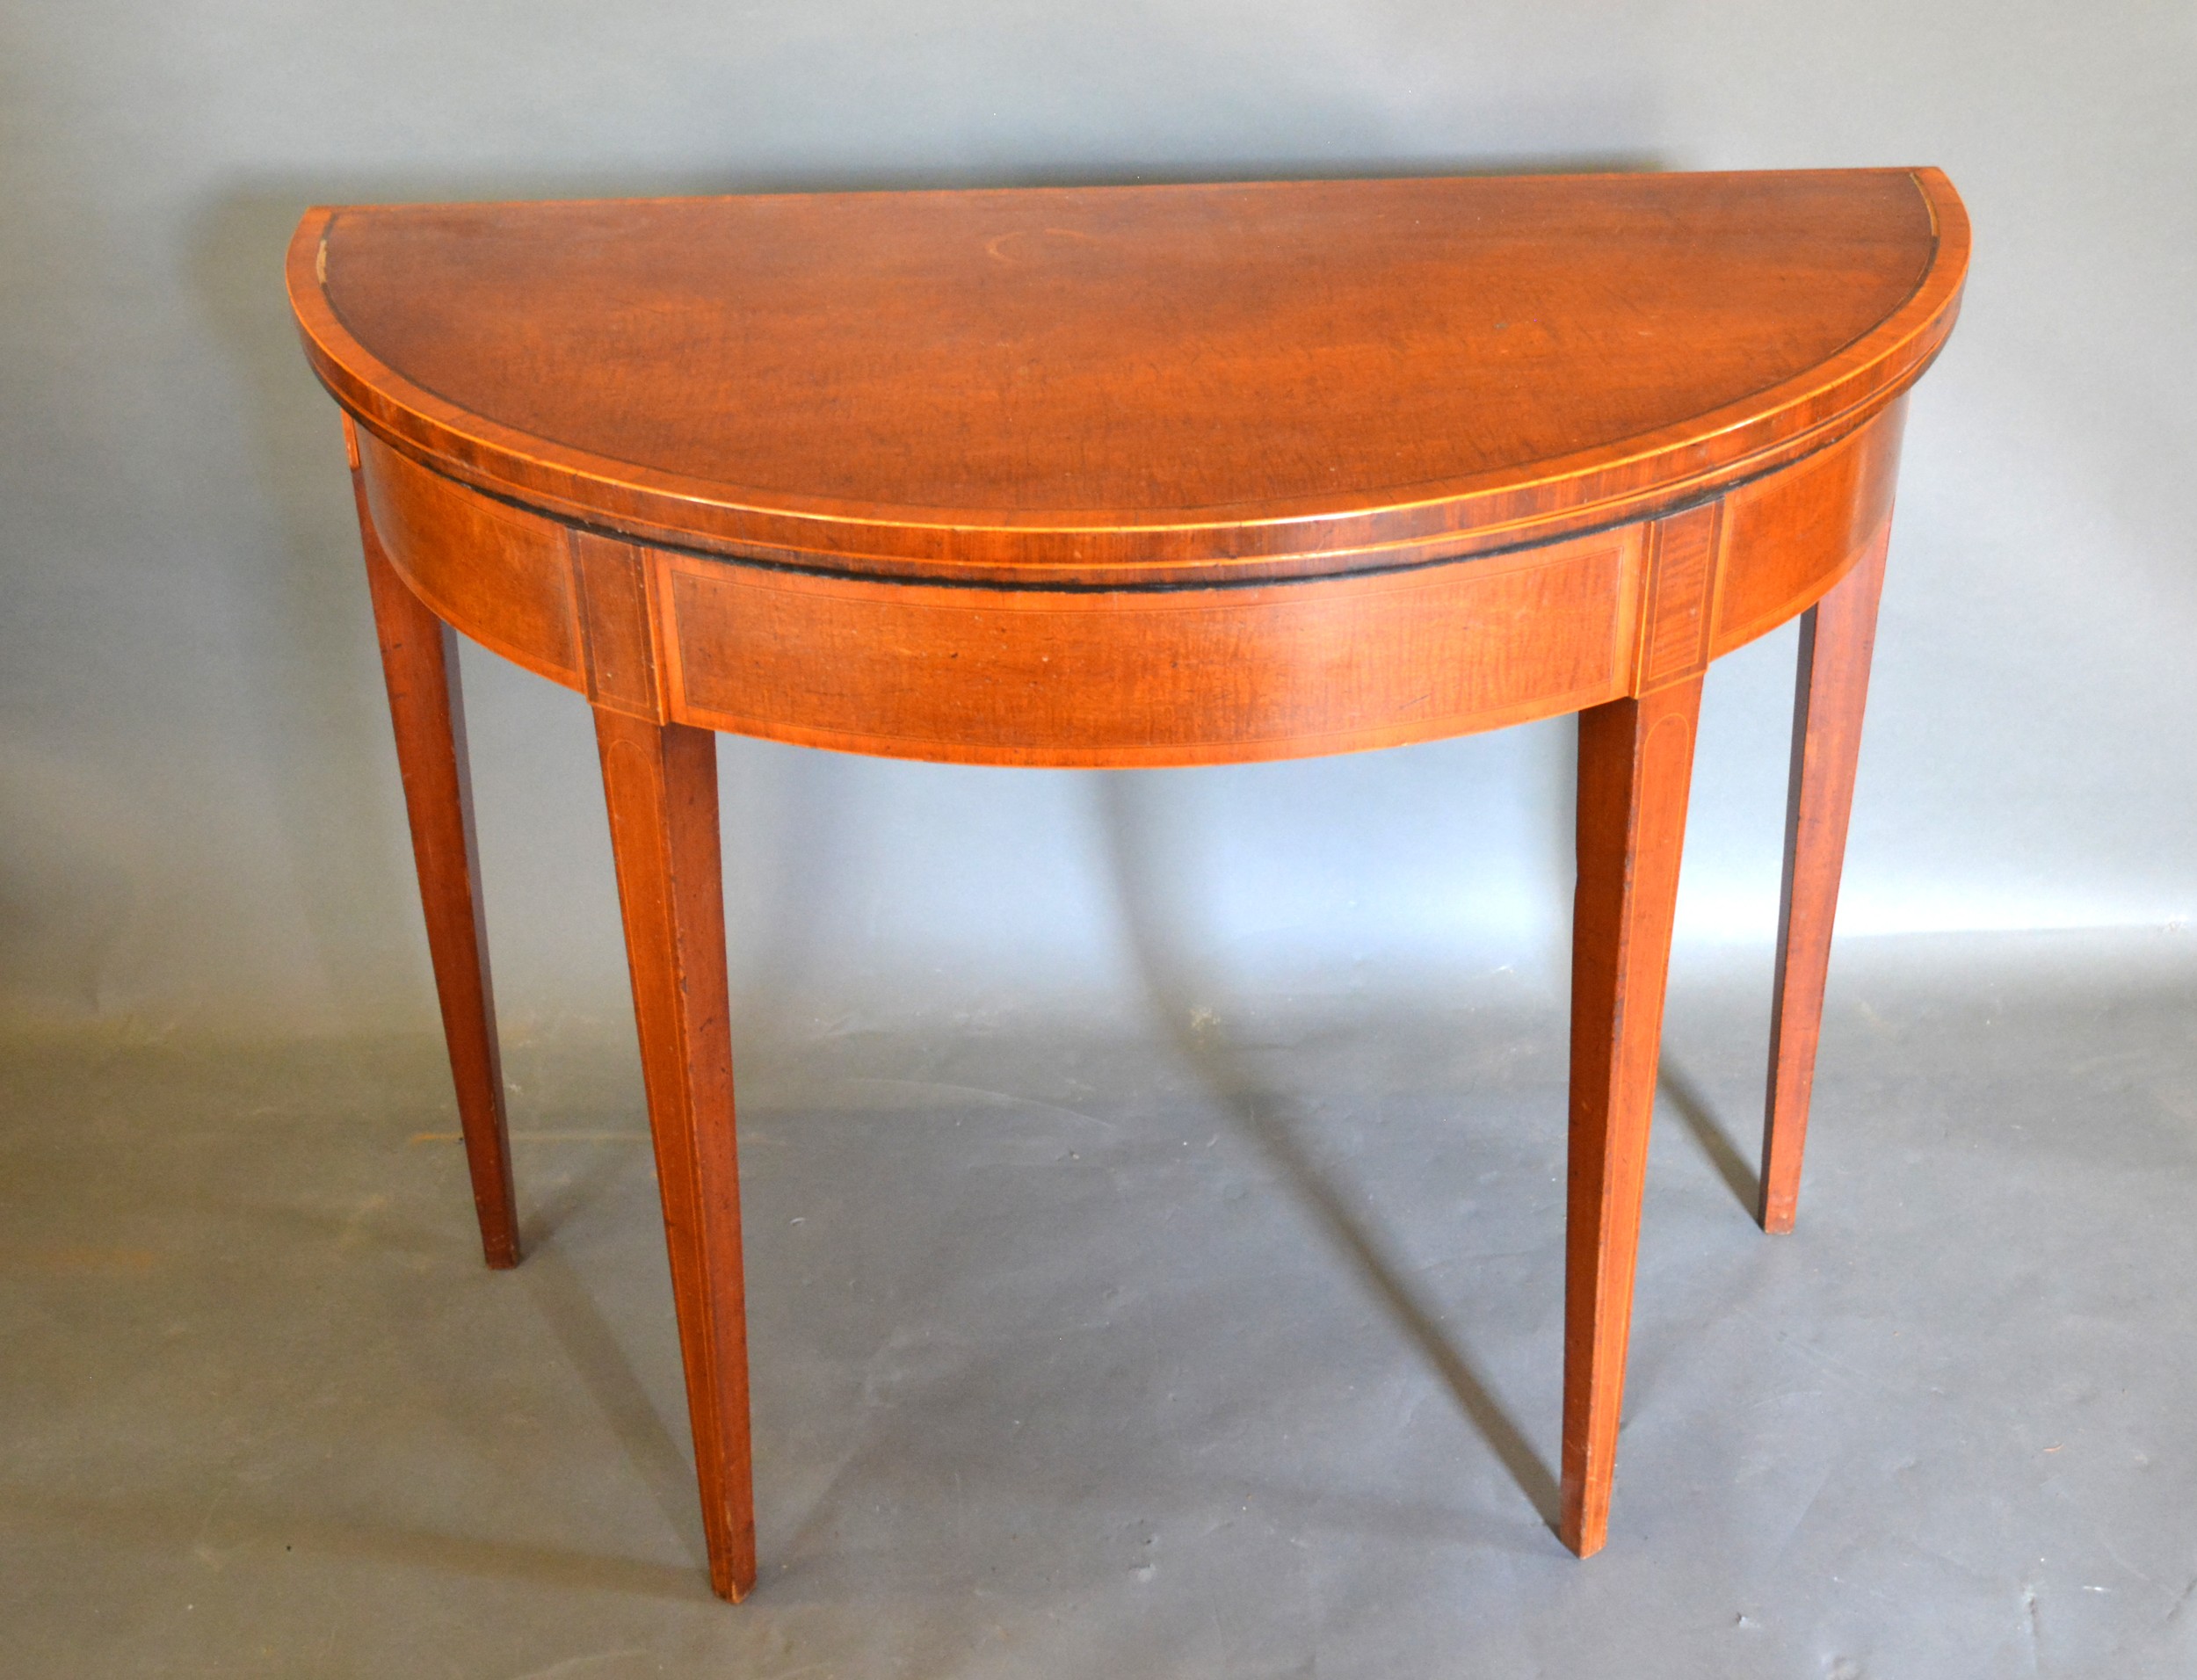 A 19th Century Mahogany Satinwood Crossbanded Demi Lune Card Table with square tapering legs